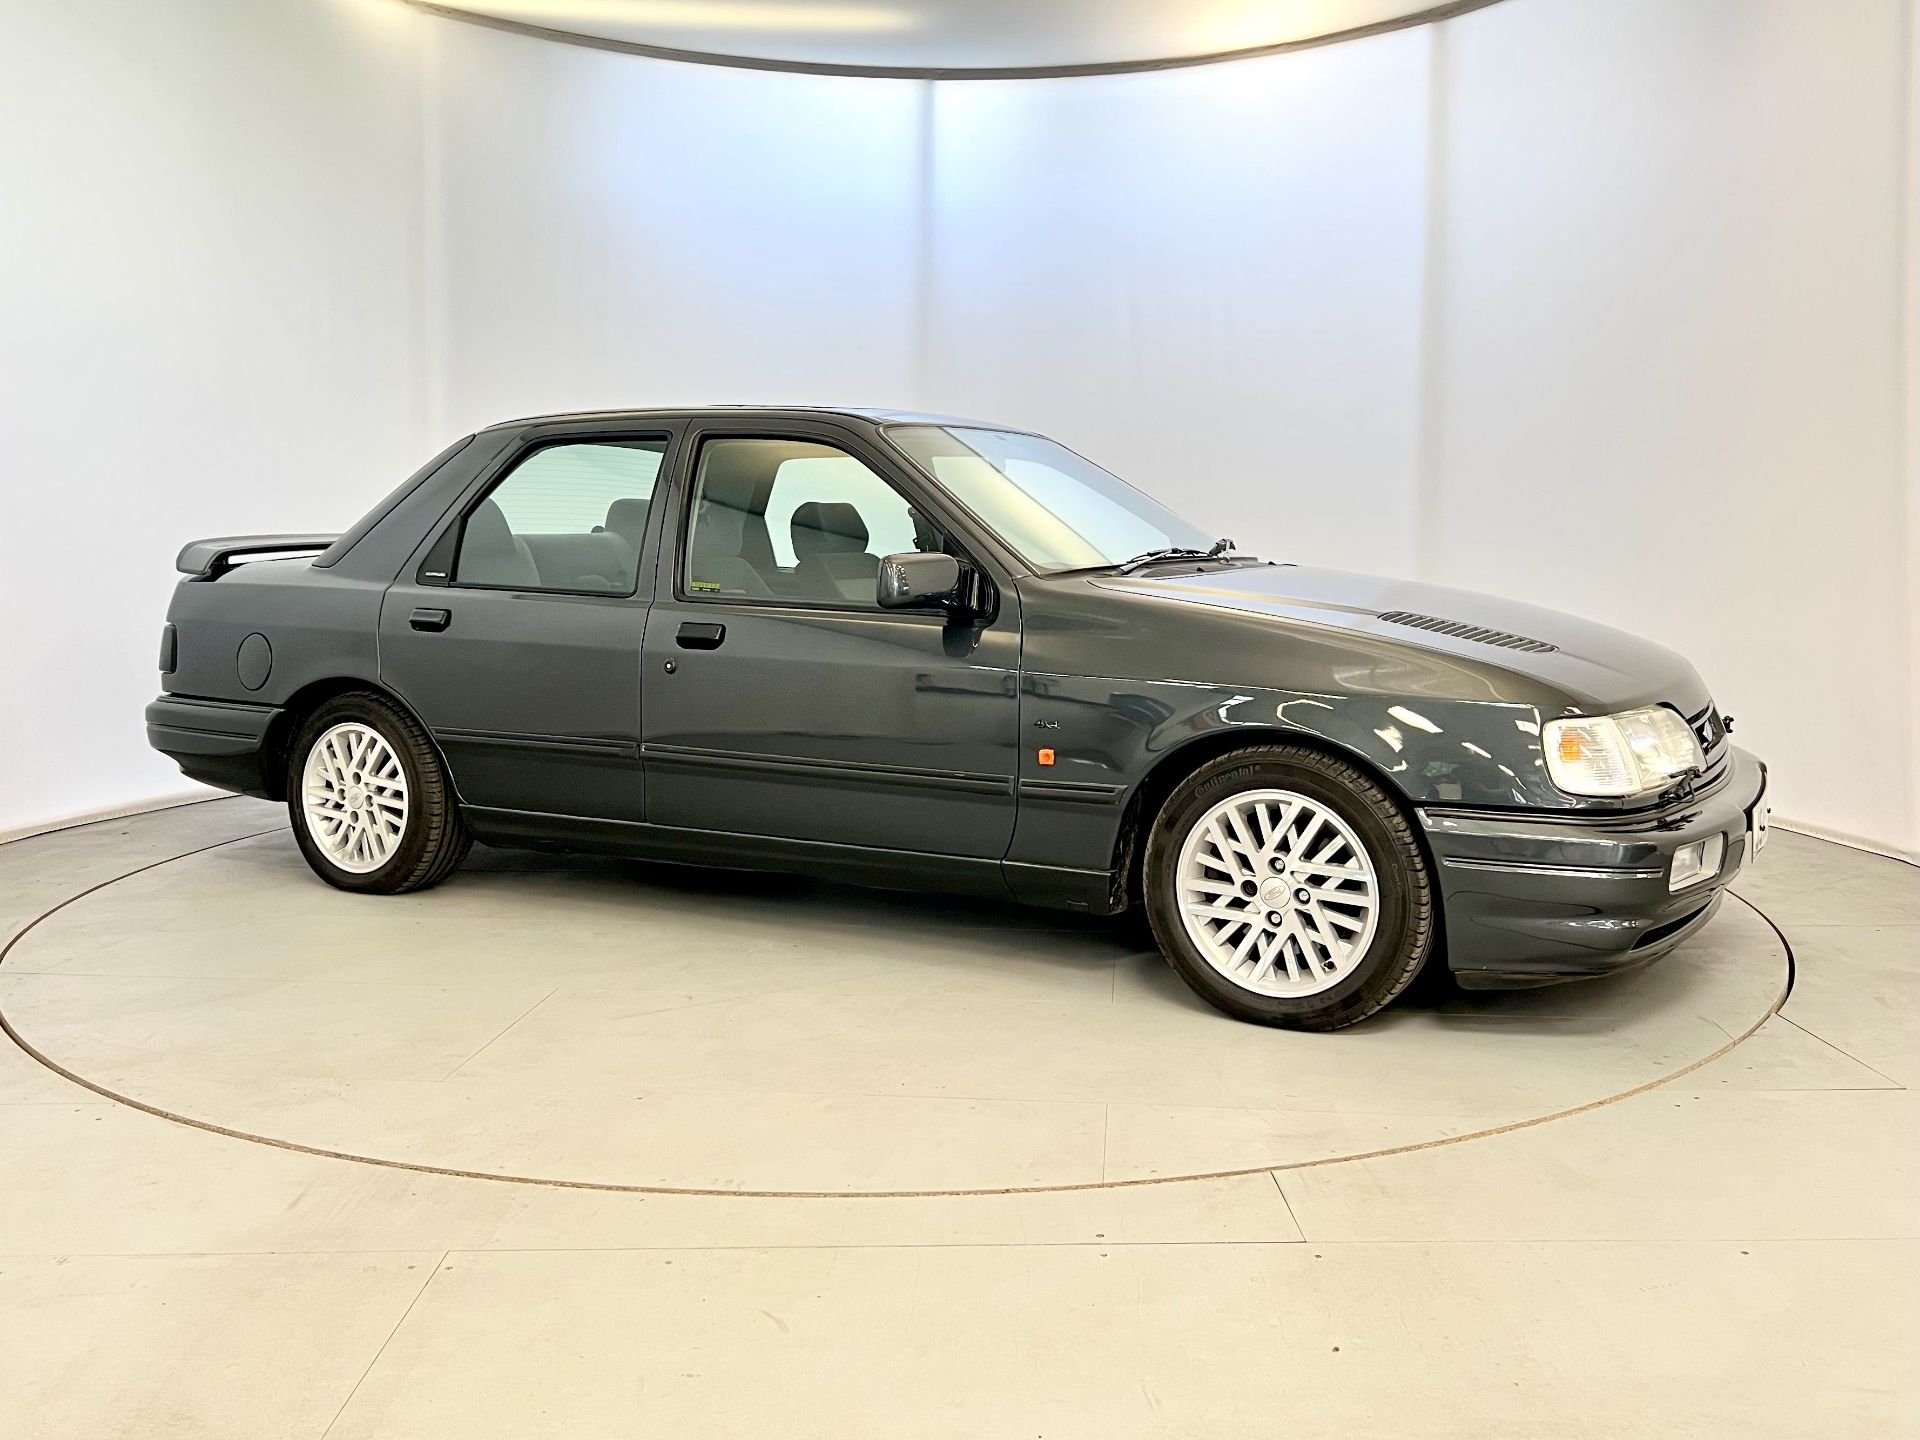 Ford Sierra Sapphire Cosworth - Image 12 of 37